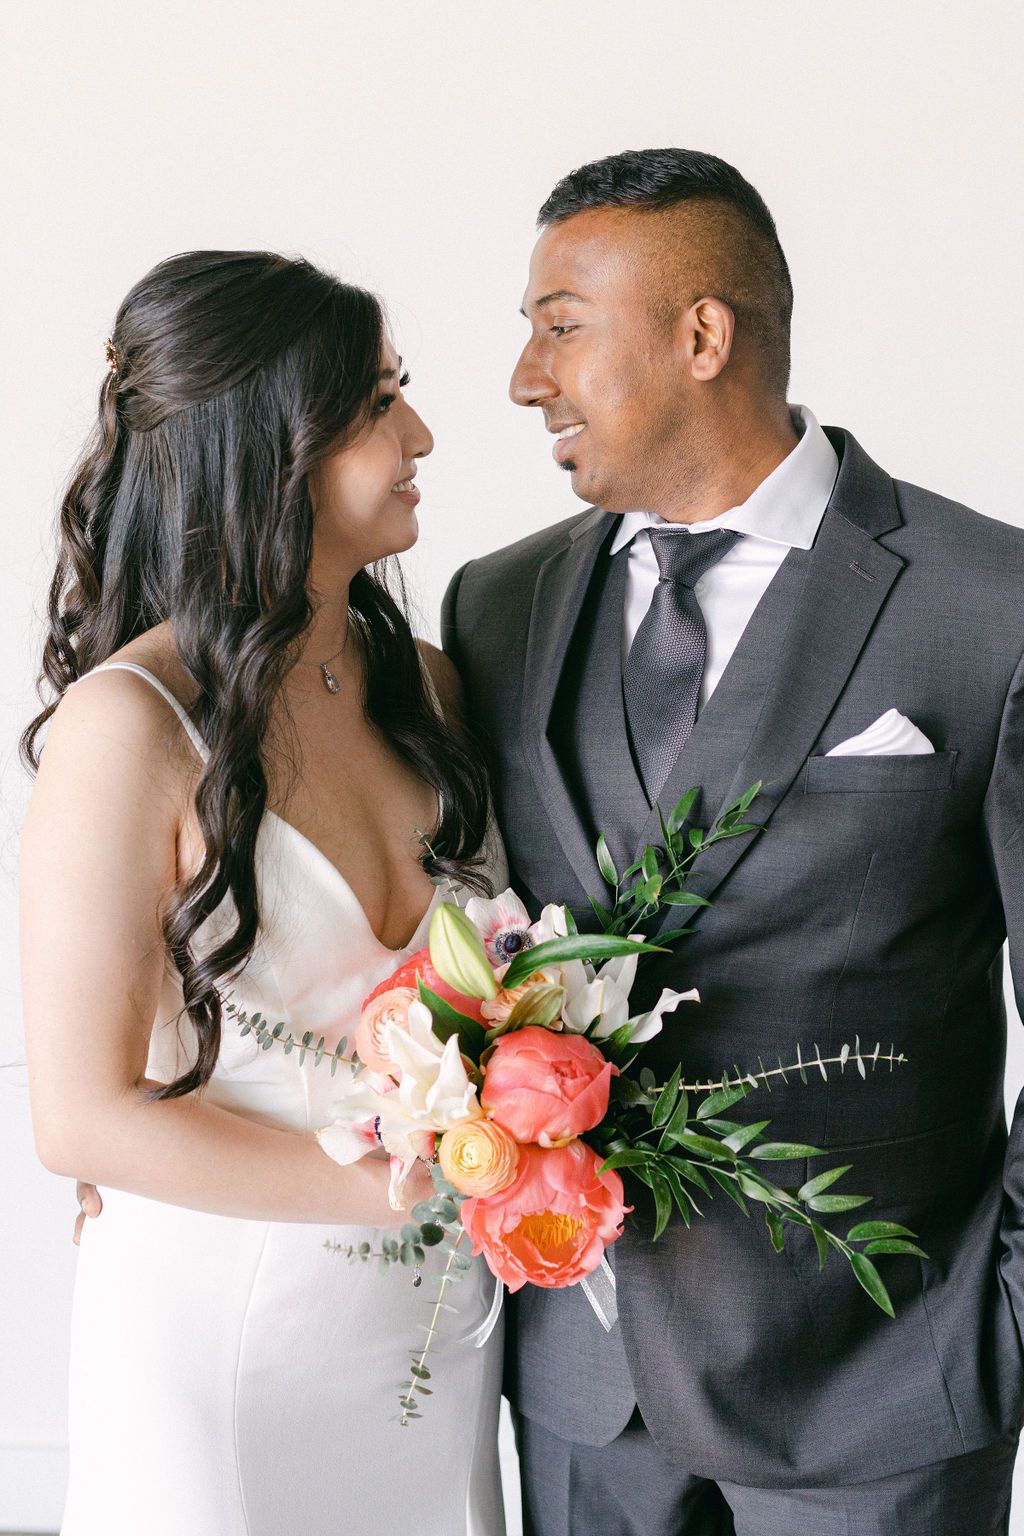 Modern Wedding Style in Vancouver Wedding Inspiration, Modern Couple, Bride and Groom Attire